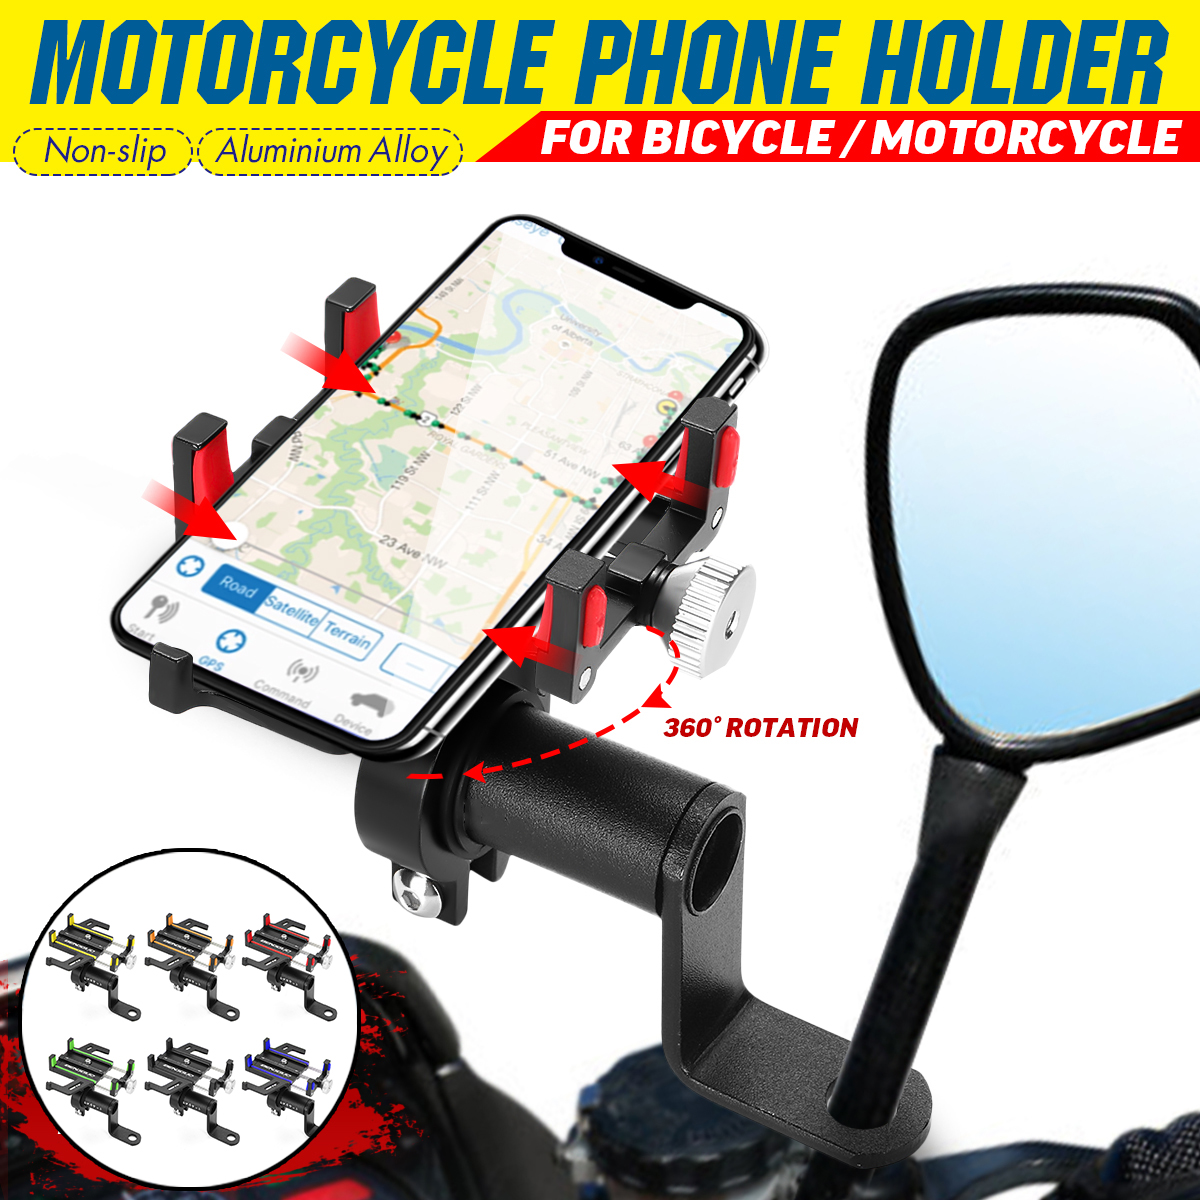 Motorbike-Motorcycle-Rear-View-Phone-Holder-360-Degree-Rotation-For-47-60-inch-Smart-Phones-1571824-1